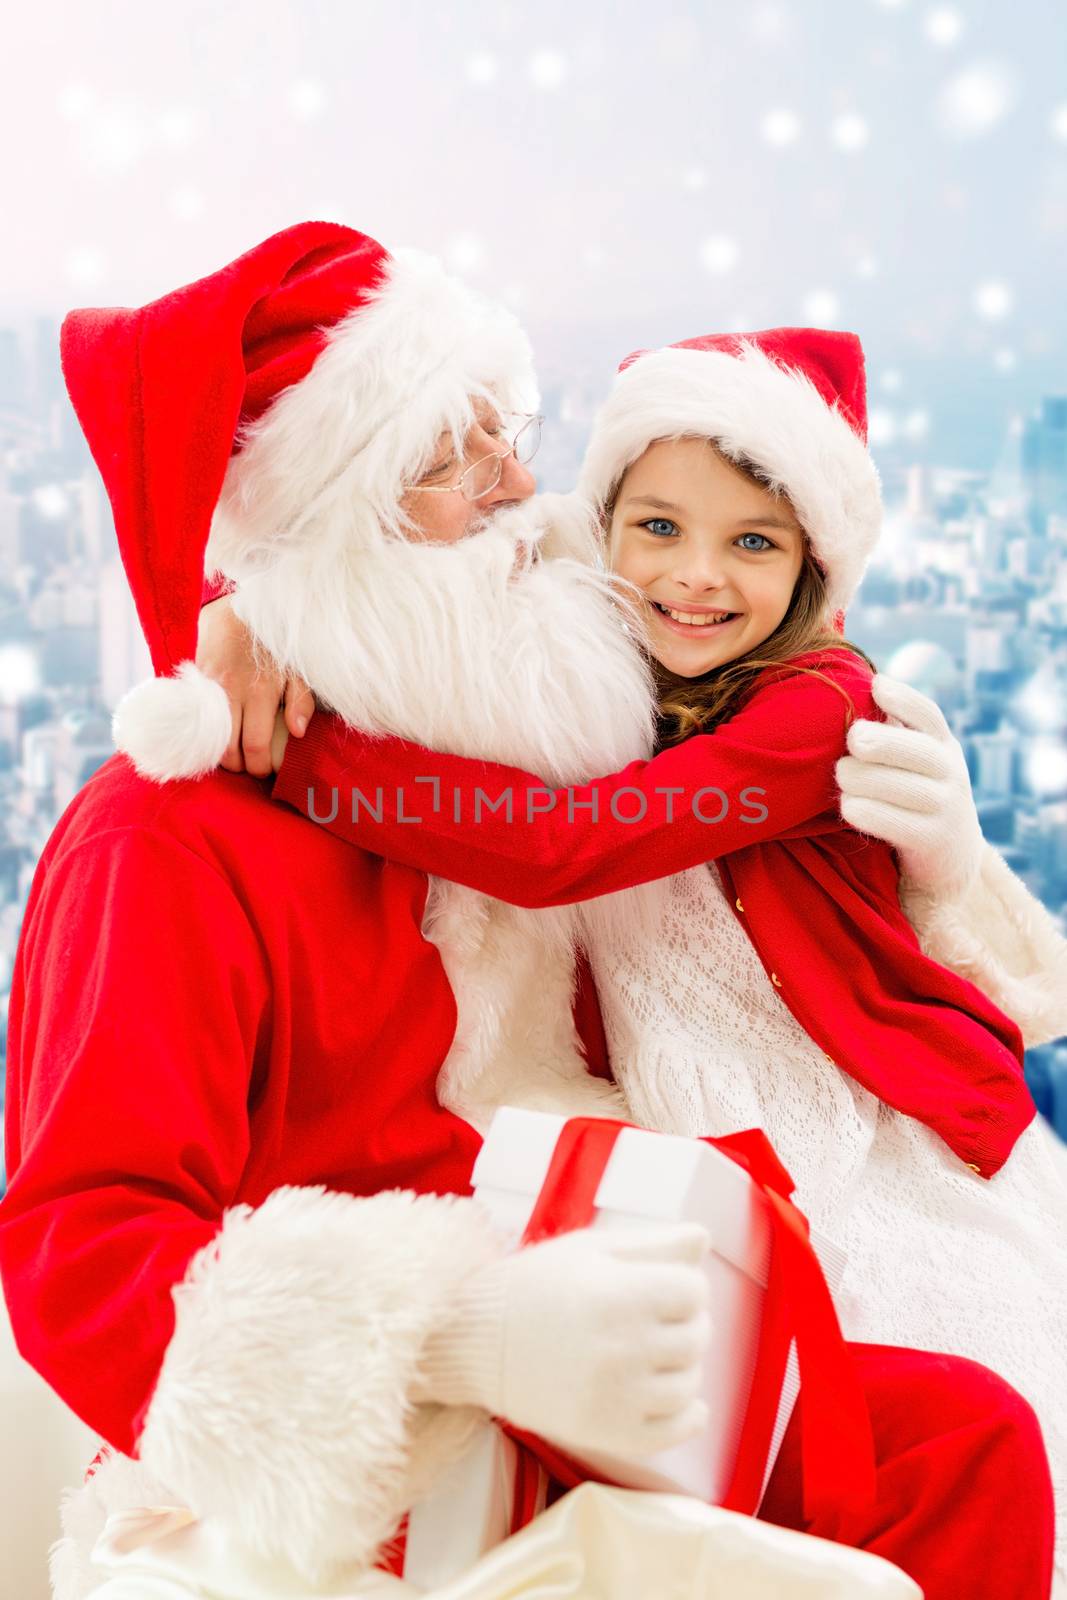 smiling little girl with santa claus and gifts by dolgachov